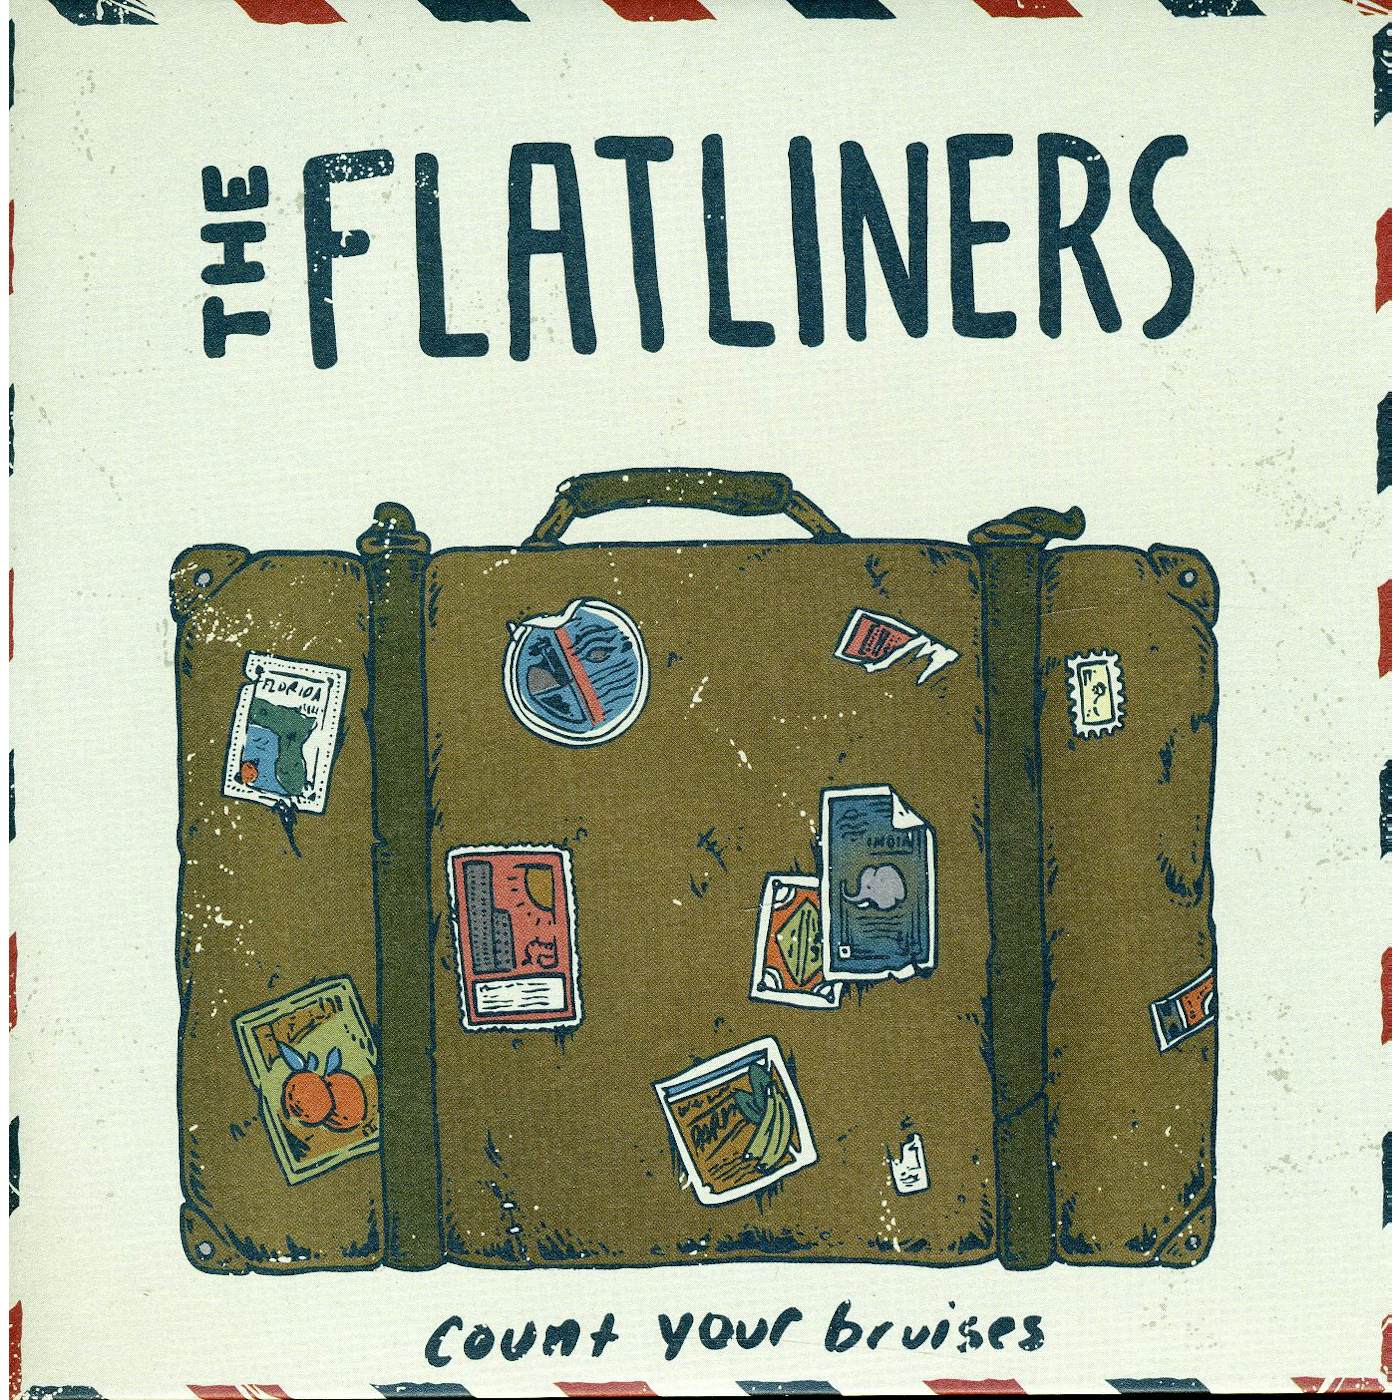 The Flatliners Count Your Bruises Vinyl Record